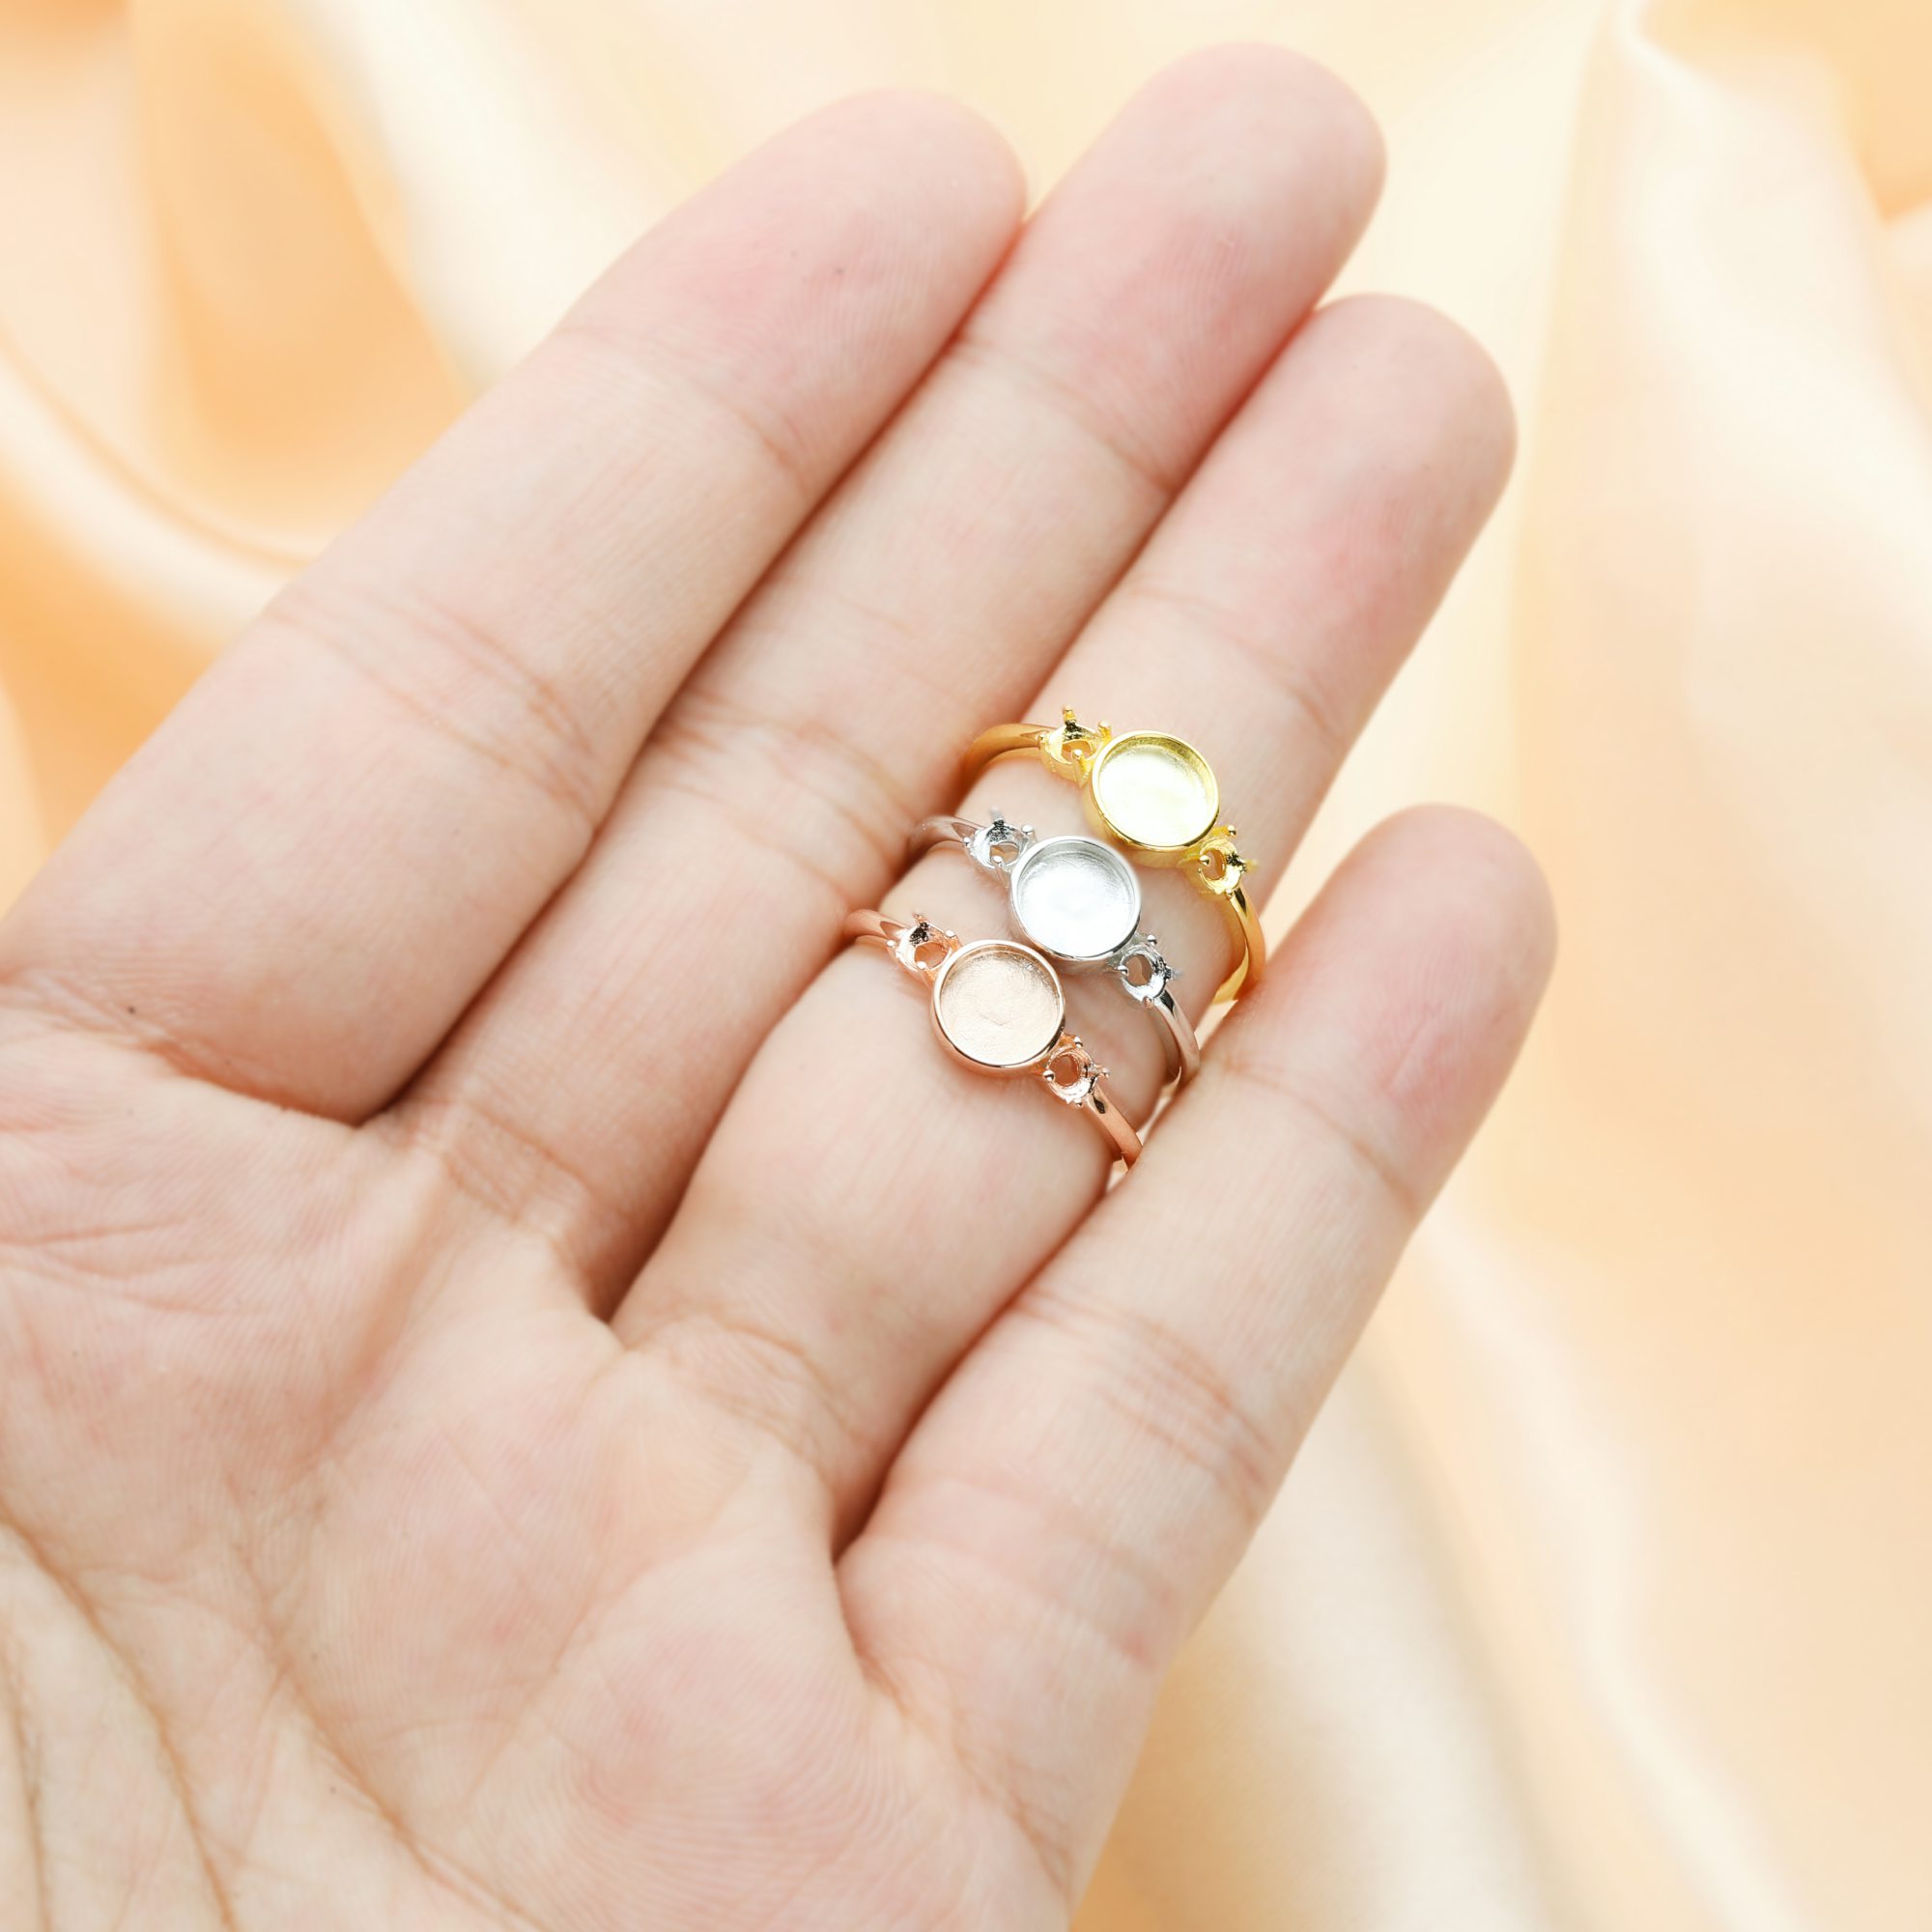 6MM Keepsake Breast Milk Resin Round Ring Settings with 3MM Side Stones,Solid Back 925 Sterling Silver Rose Gold Plated Ring,3 Stone Bezel Ring,DIY Ring Supplies 1215063 - Click Image to Close